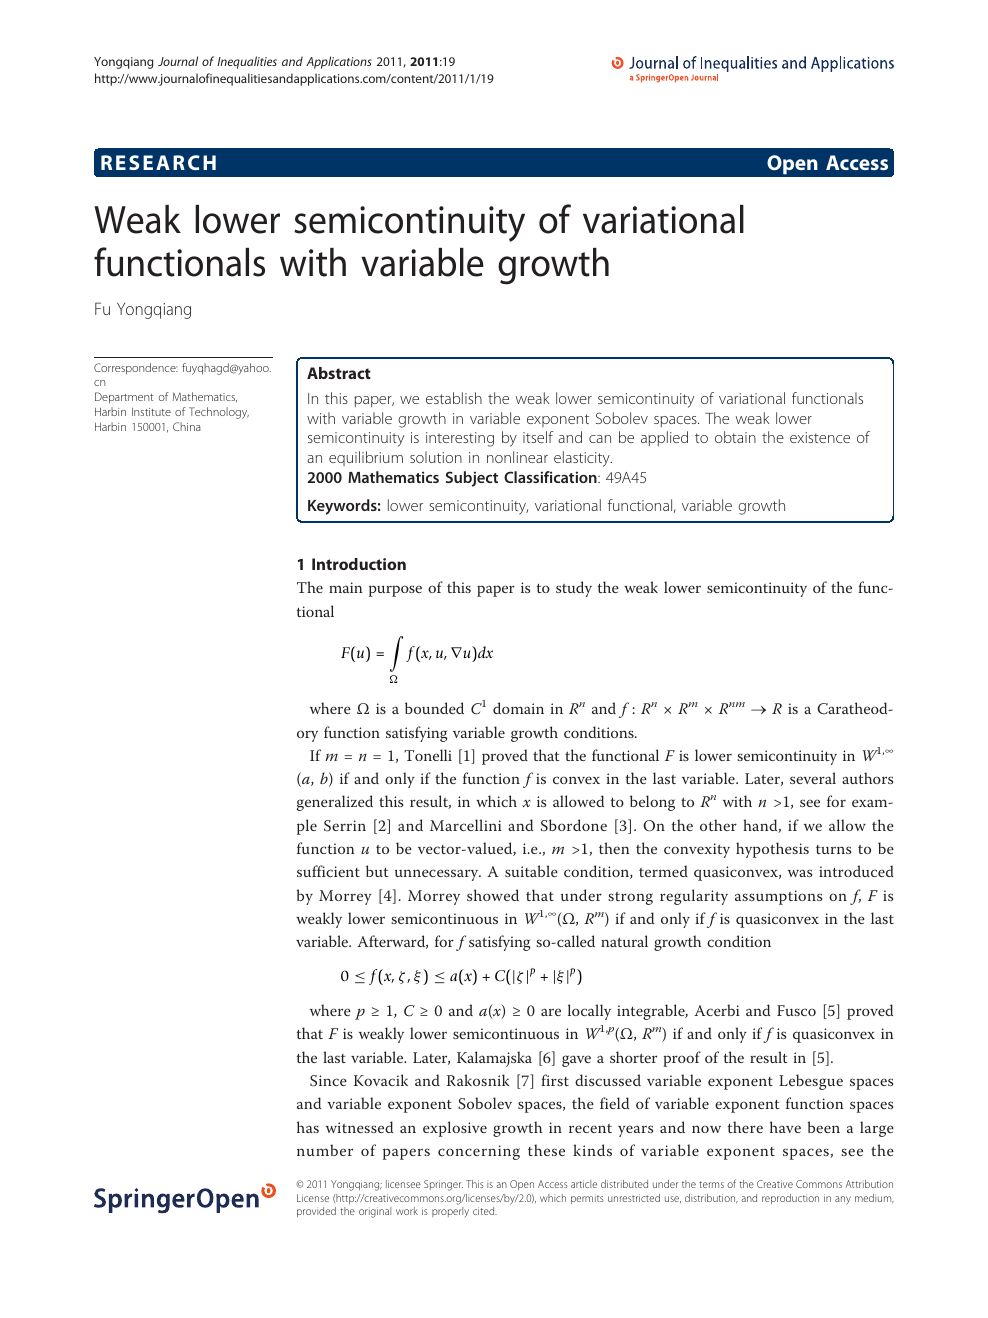 Weak Lower Semicontinuity Of Variational Functionals With Variable Growth Topic Of Research Paper In Mathematics Download Scholarly Article Pdf And Read For Free On Cyberleninka Open Science Hub